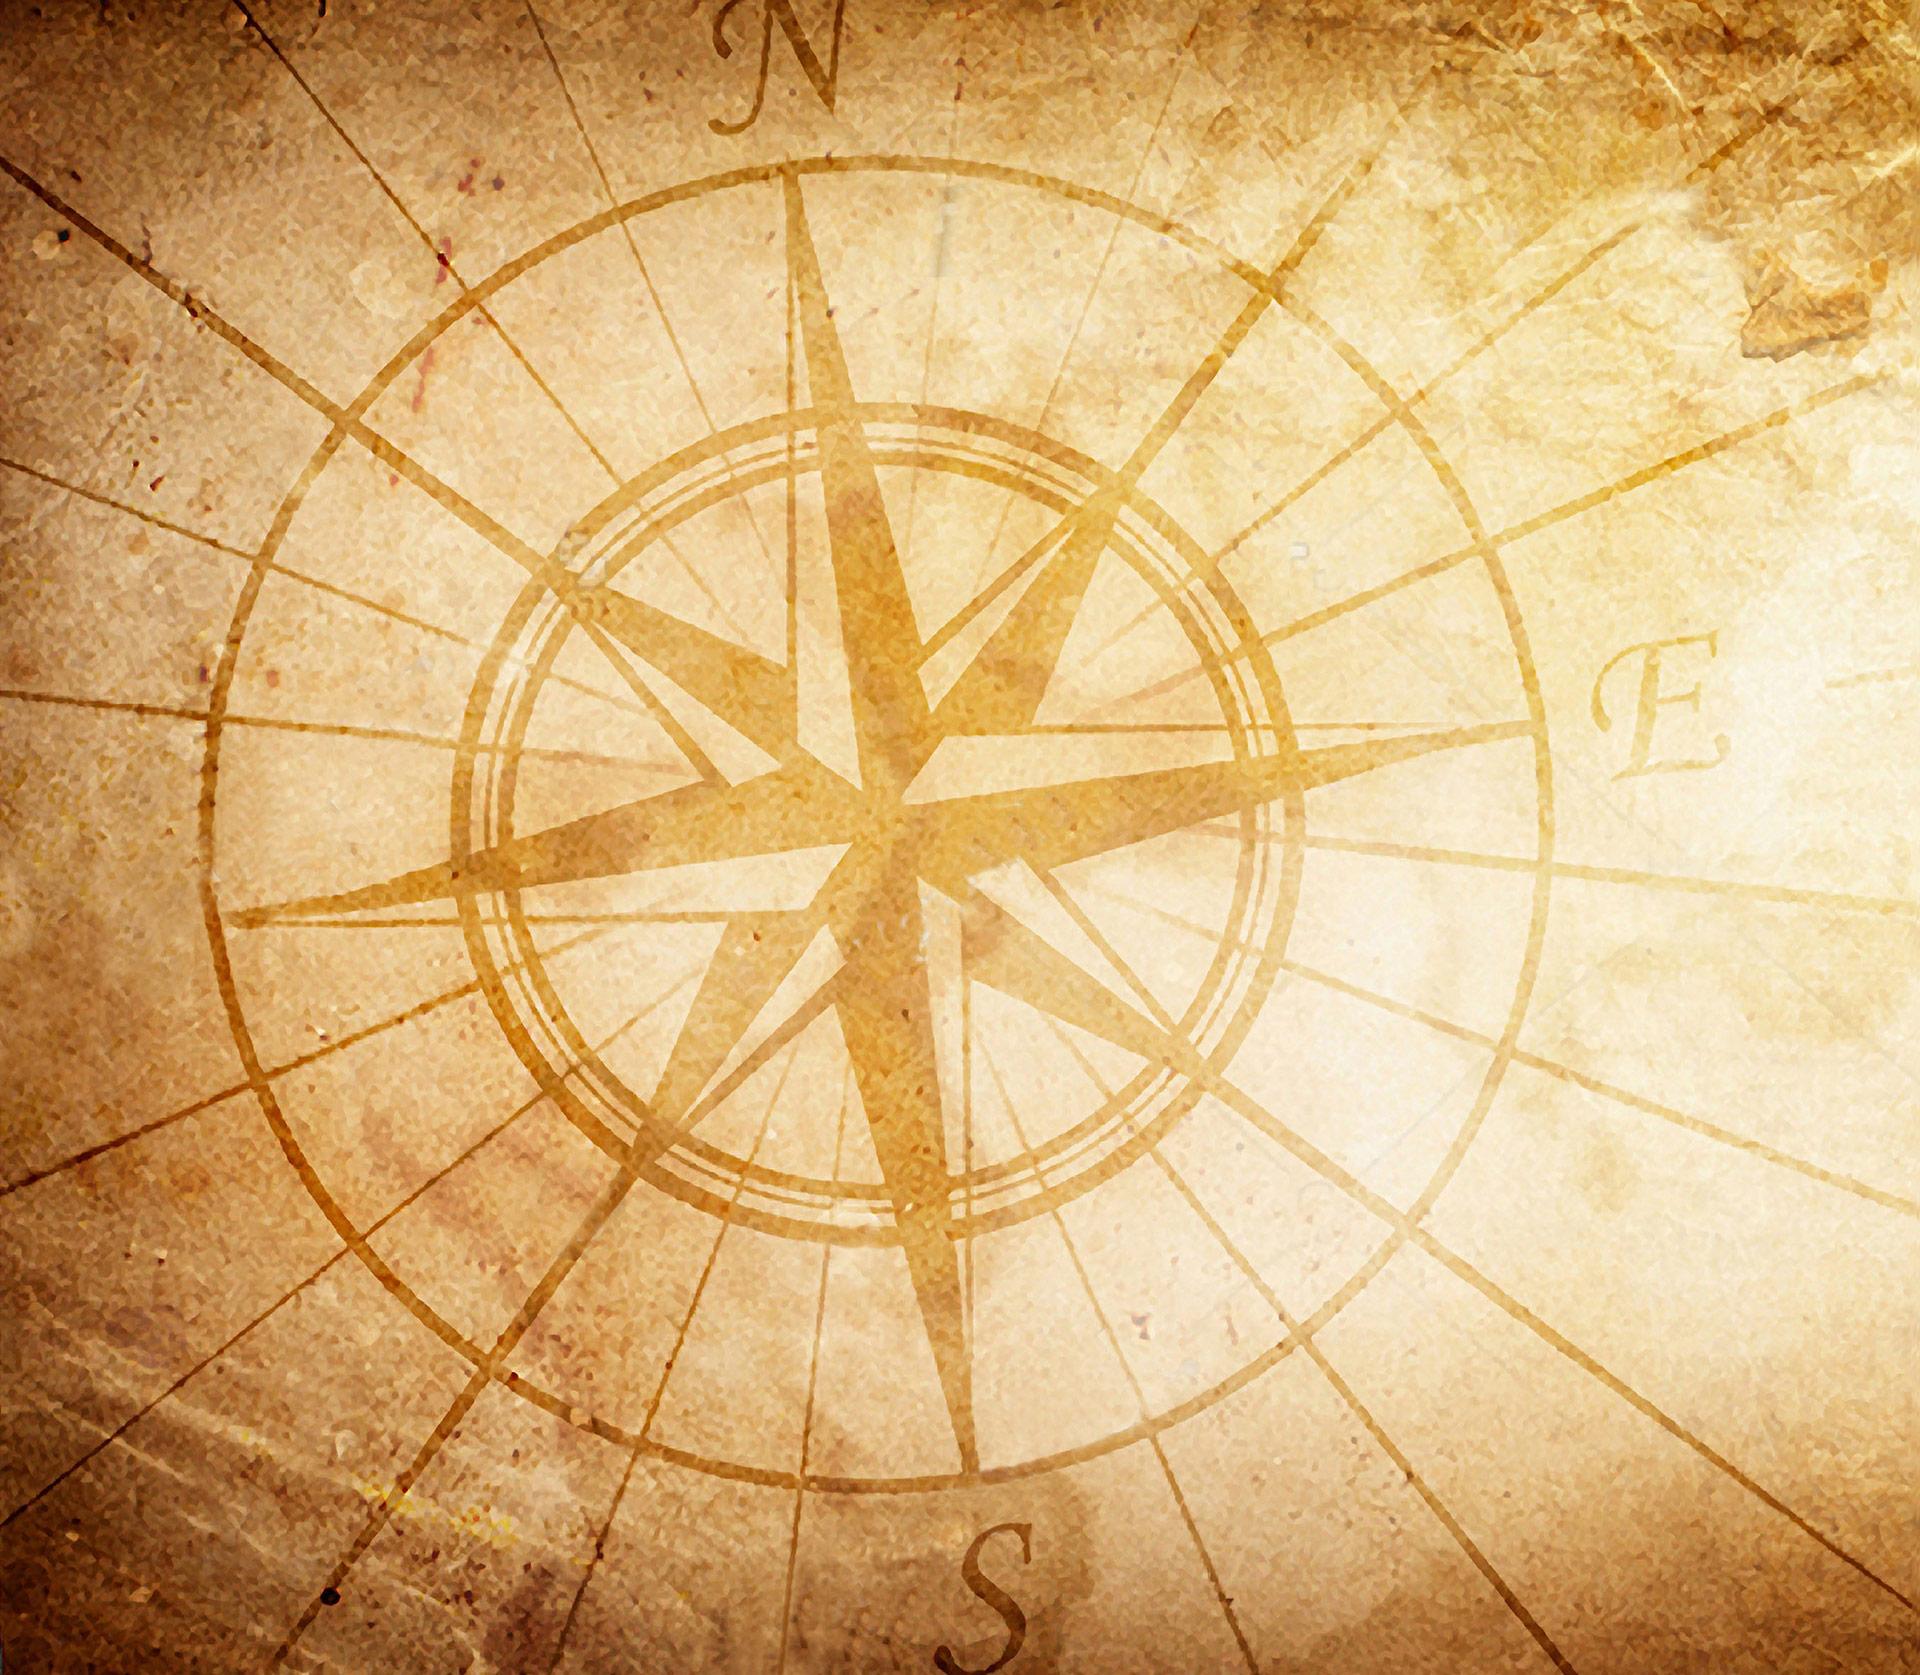 Compass rose background graphic